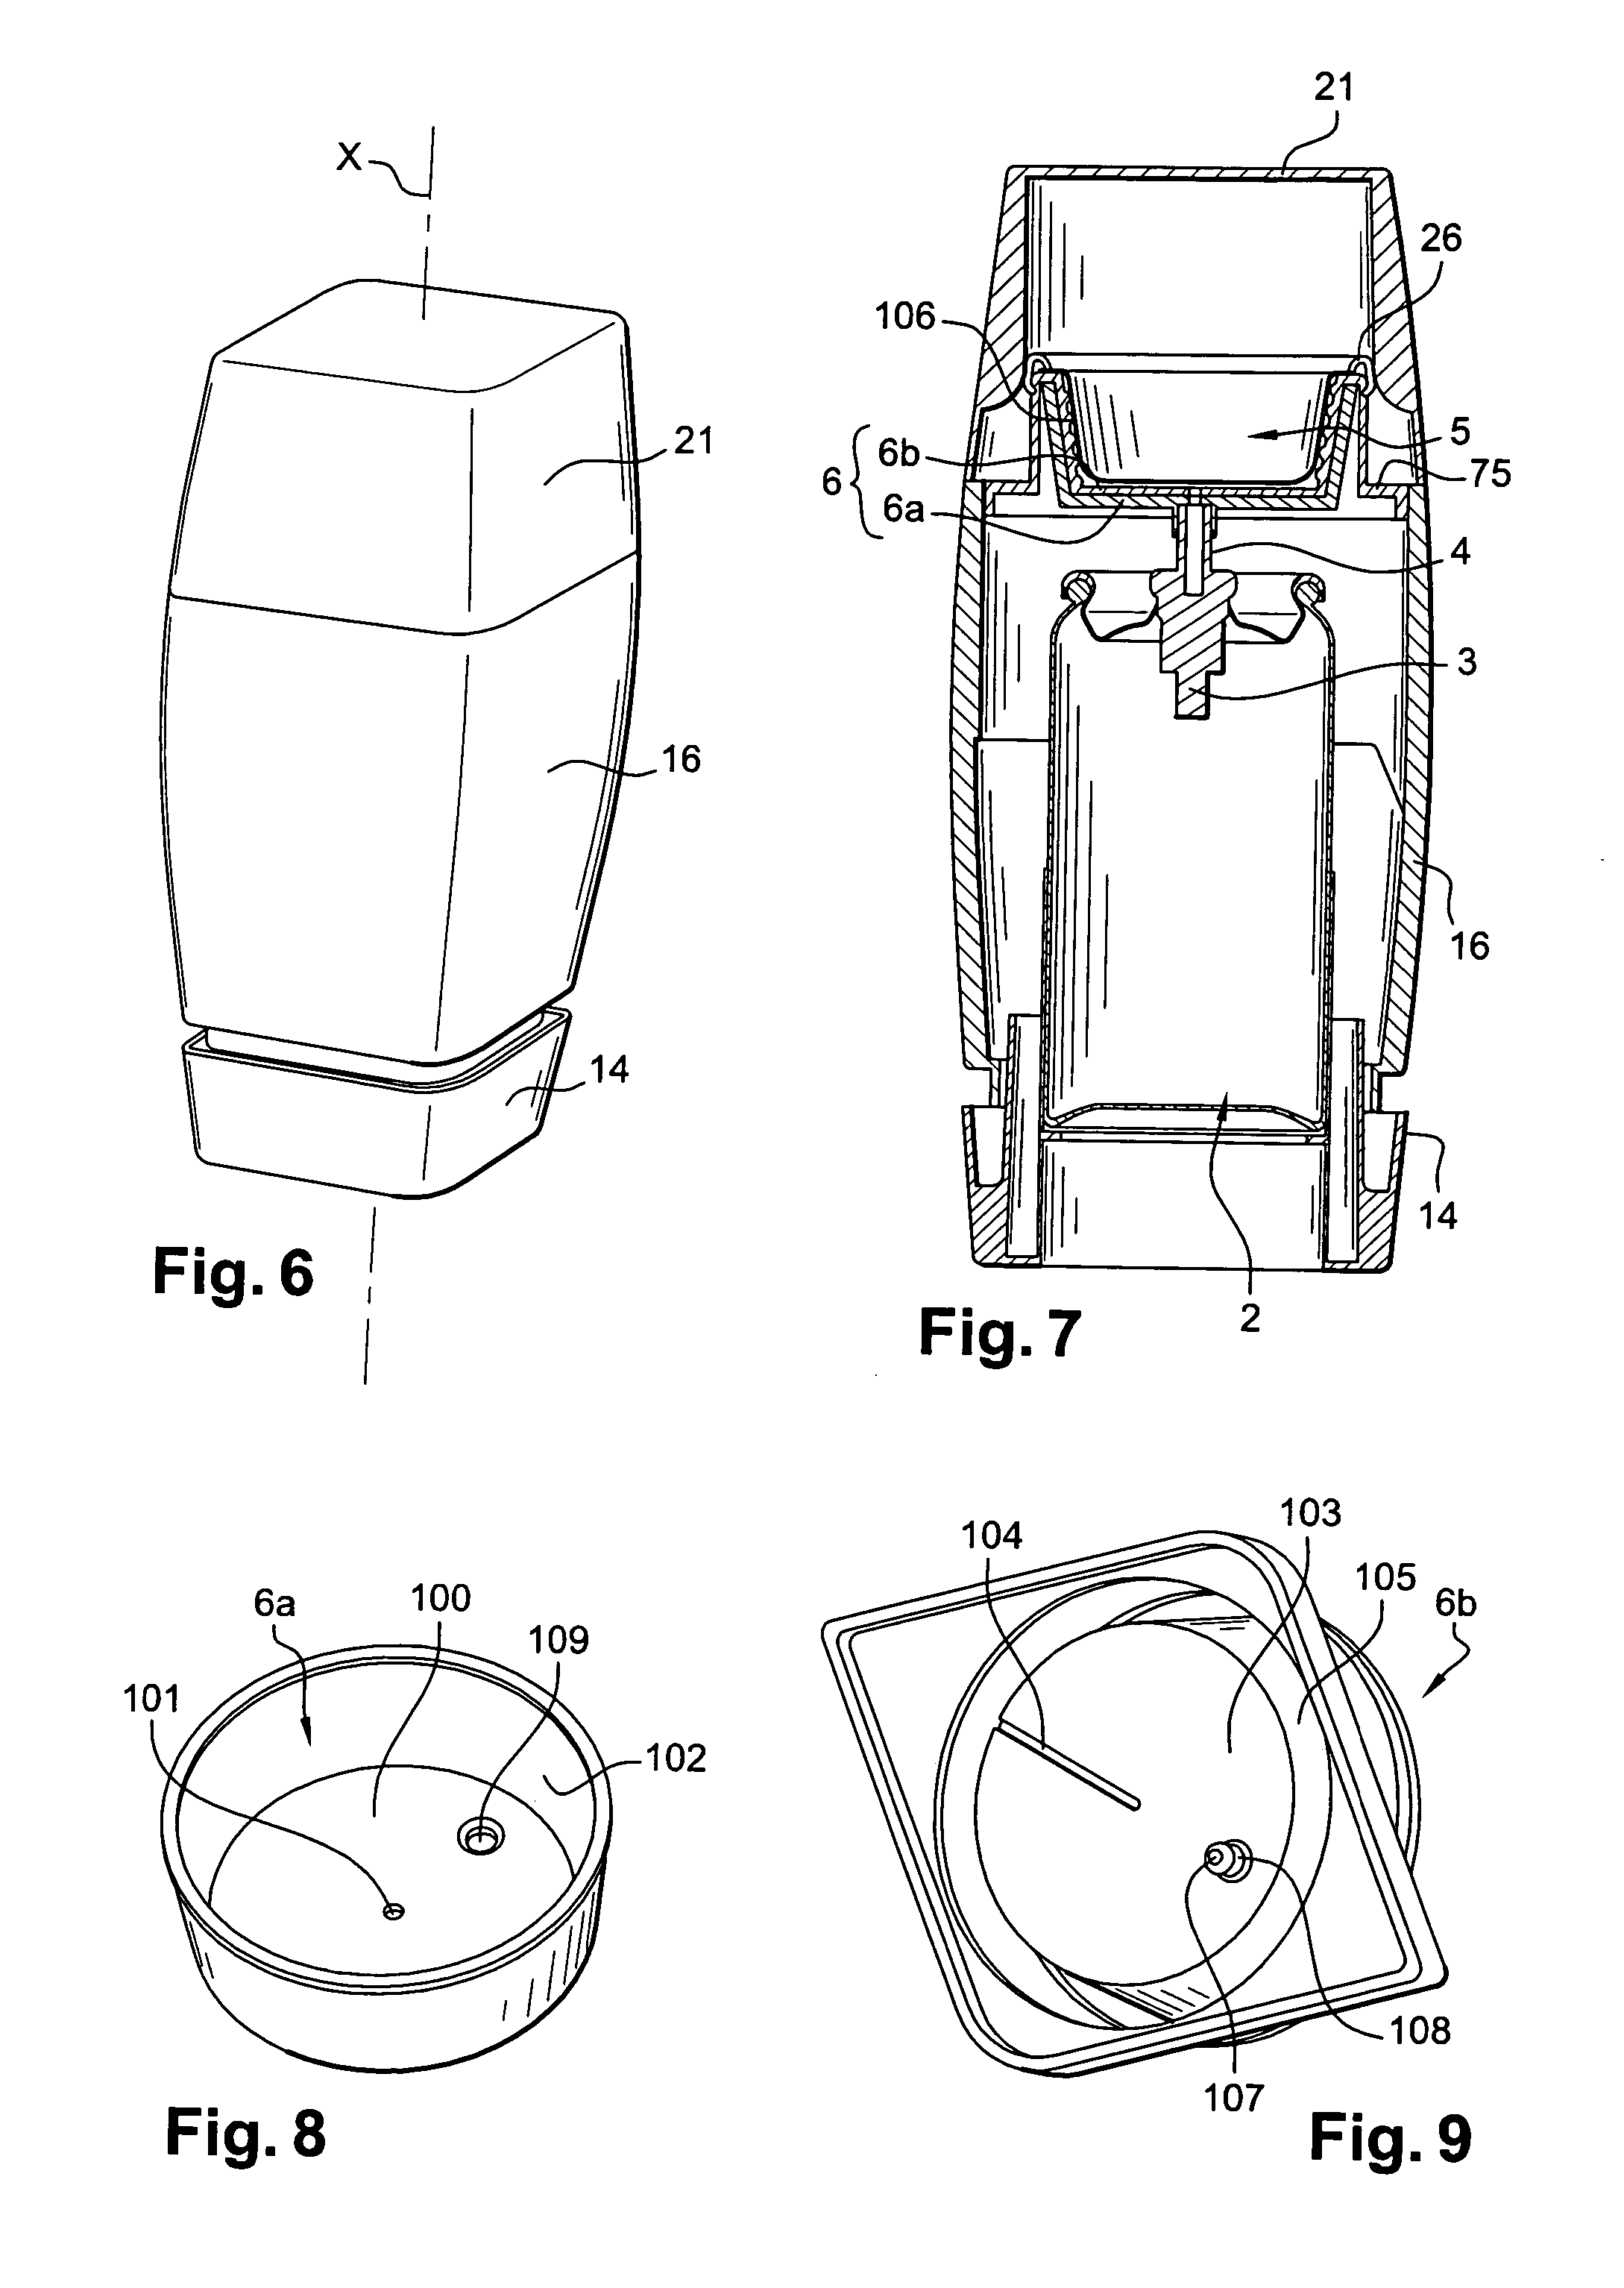 Cooling device for packaging product and packaging assembly